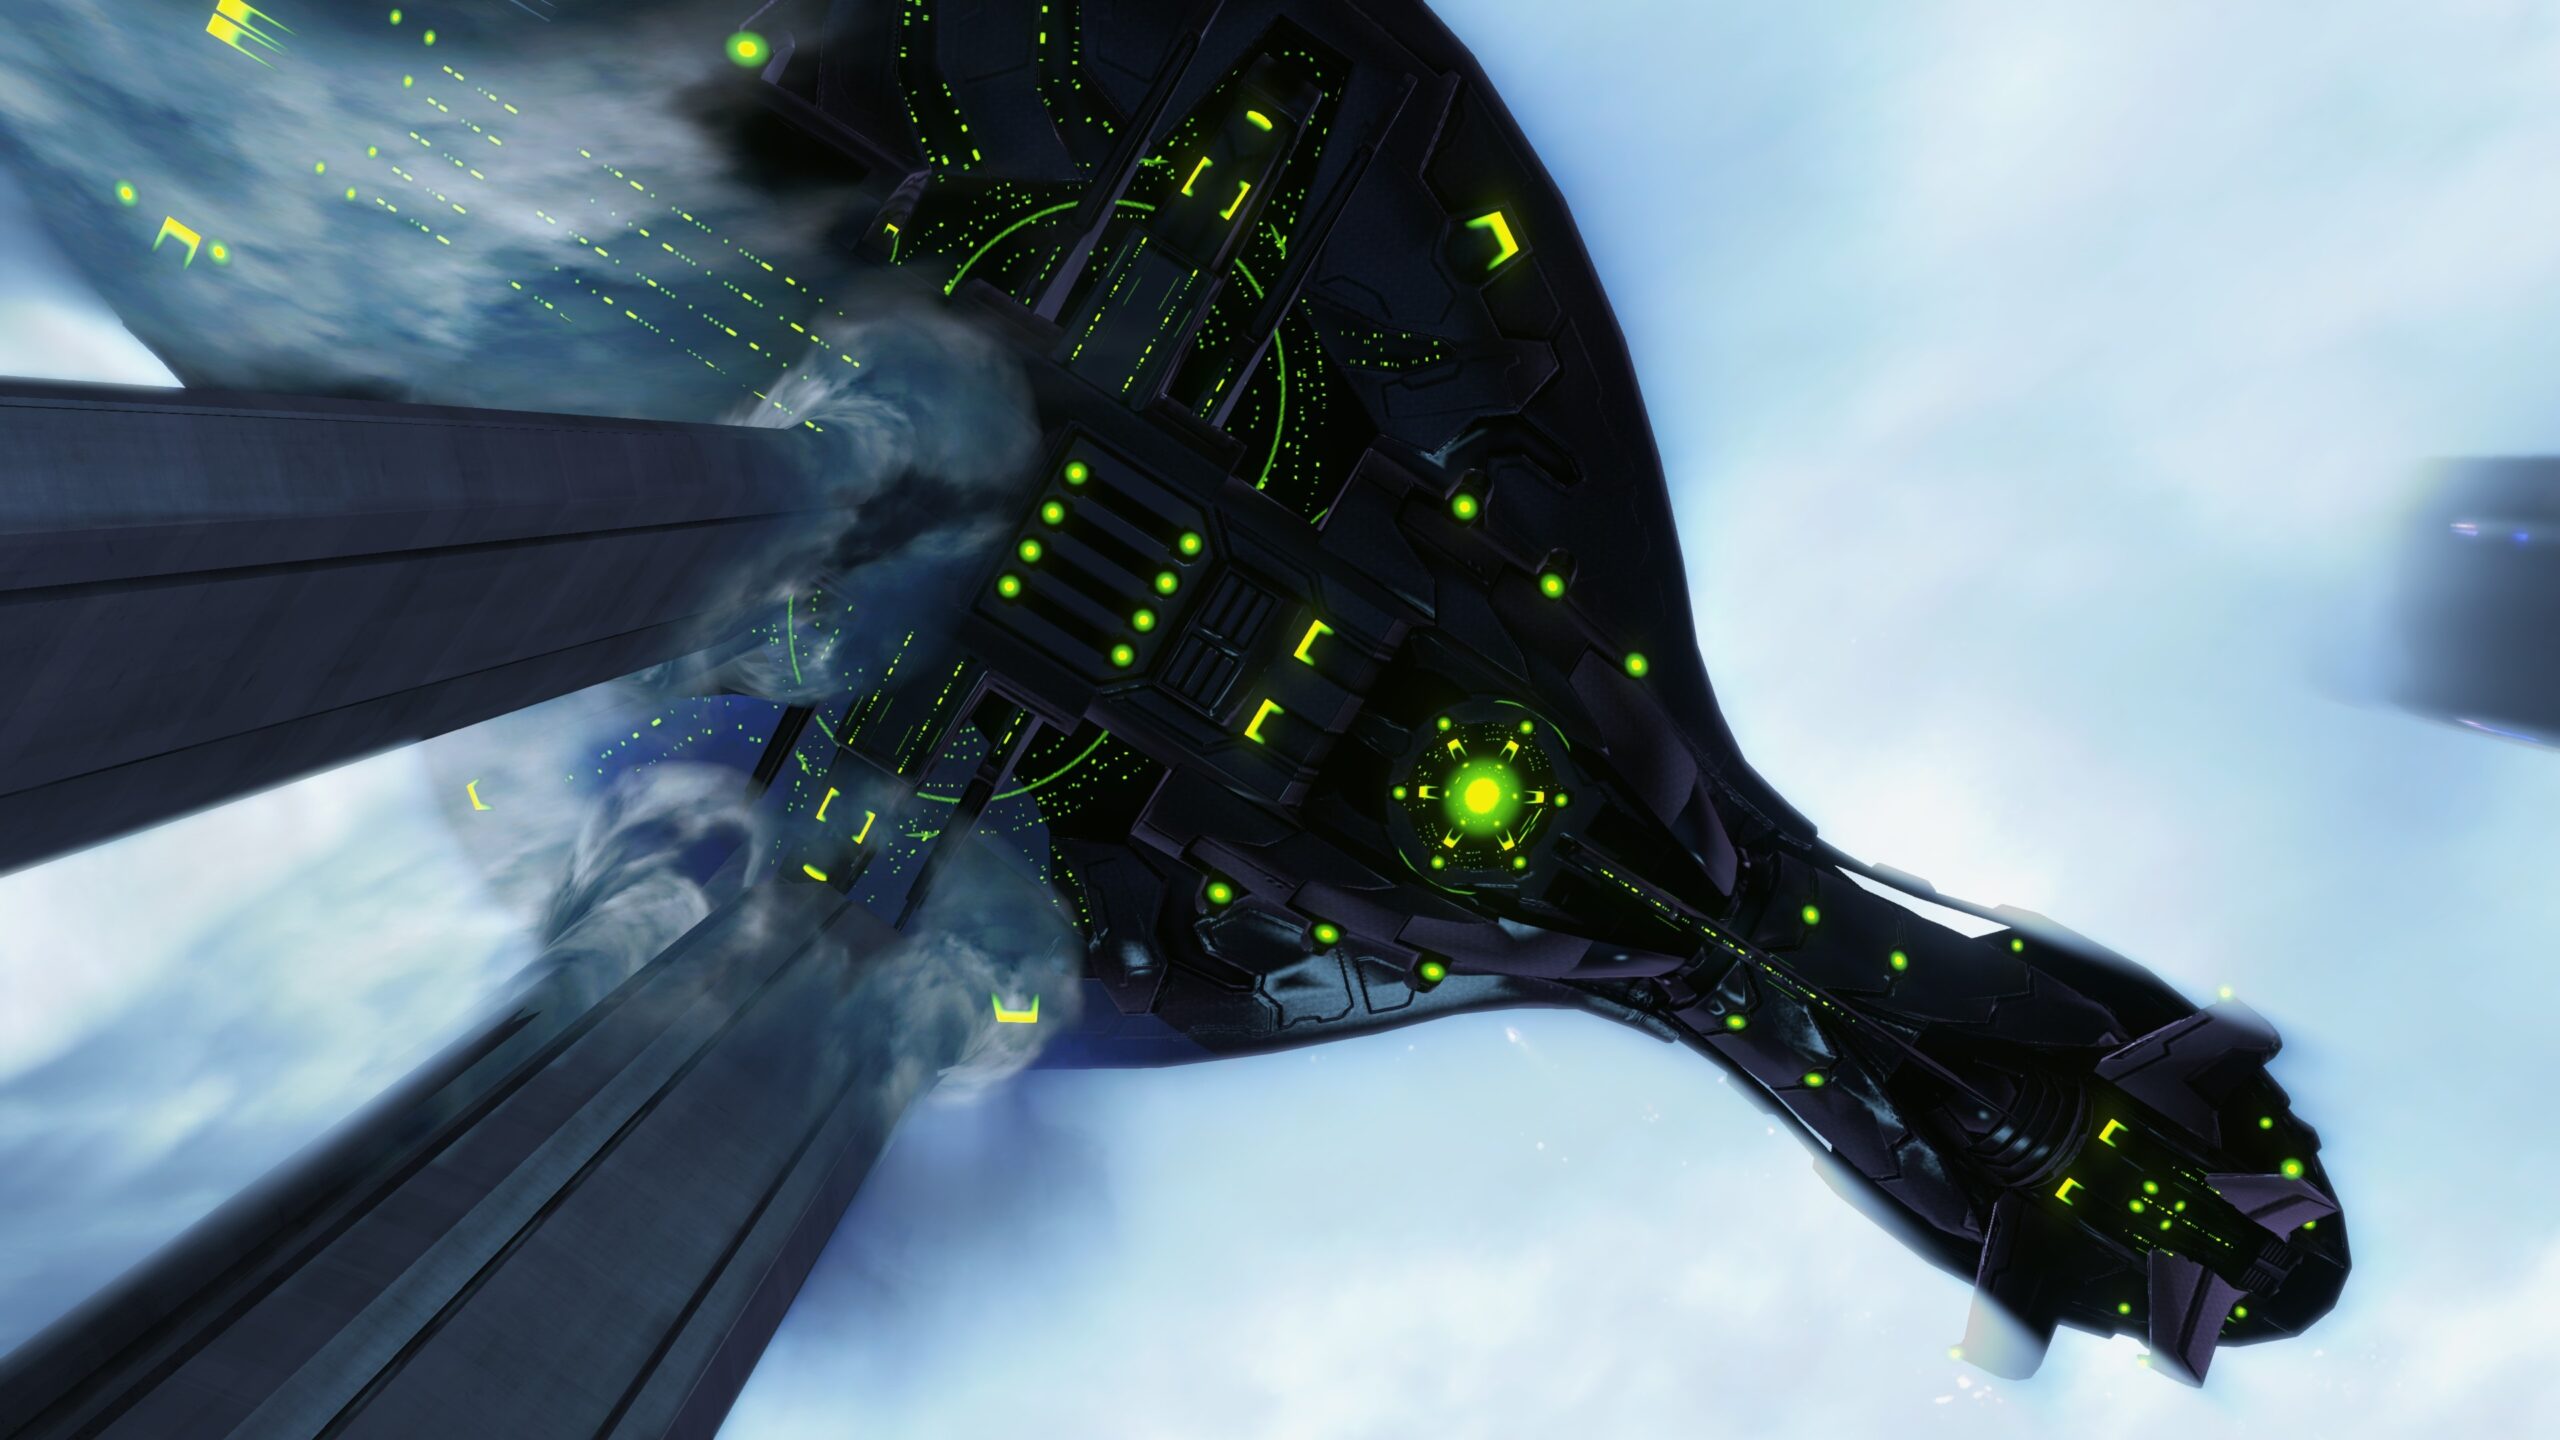 In-game screenshot of the Zanar-pattern light cruiser Panom's Canticle seen in Halo 4 Spartan Ops